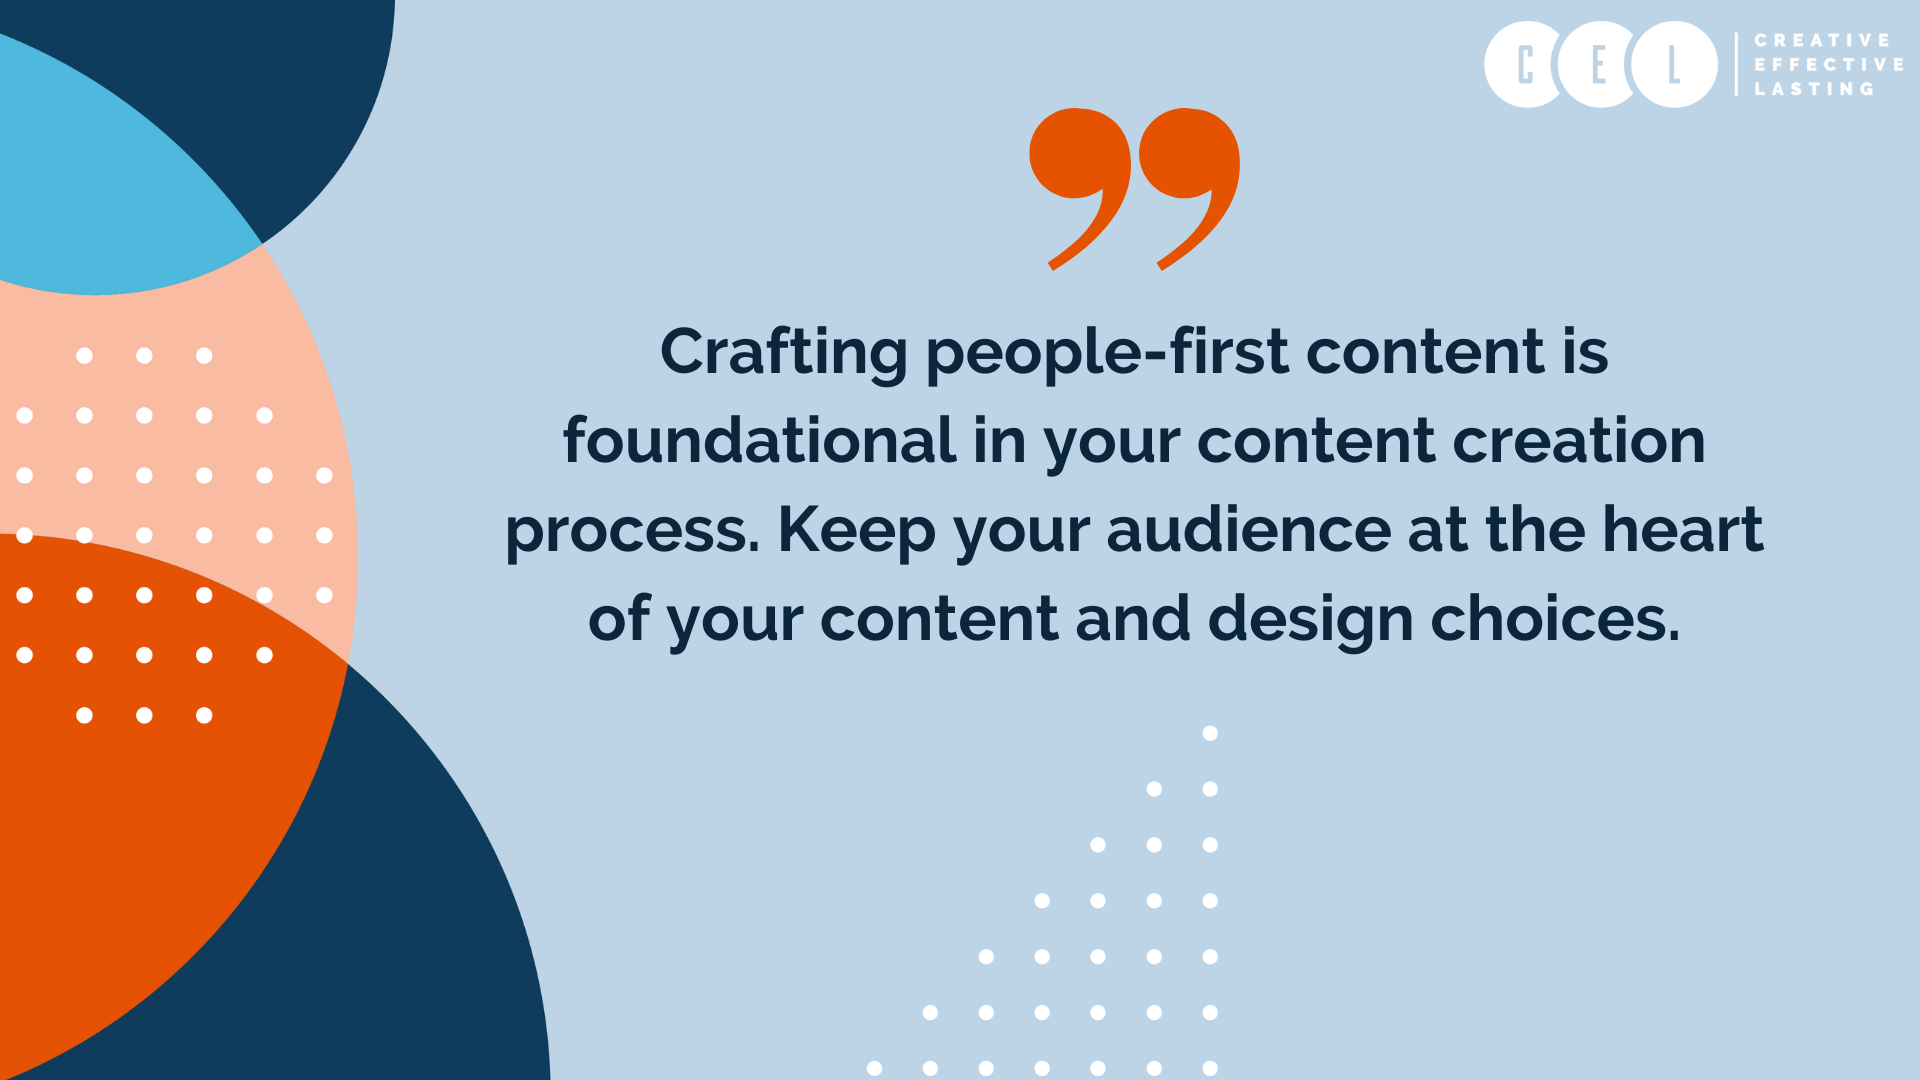 “Crafting people-first content is foundational in your content creation process,” says Ashley Winter, content marketing coordinator at CEL. “Keep your audience at the heart of your content and design choices.”